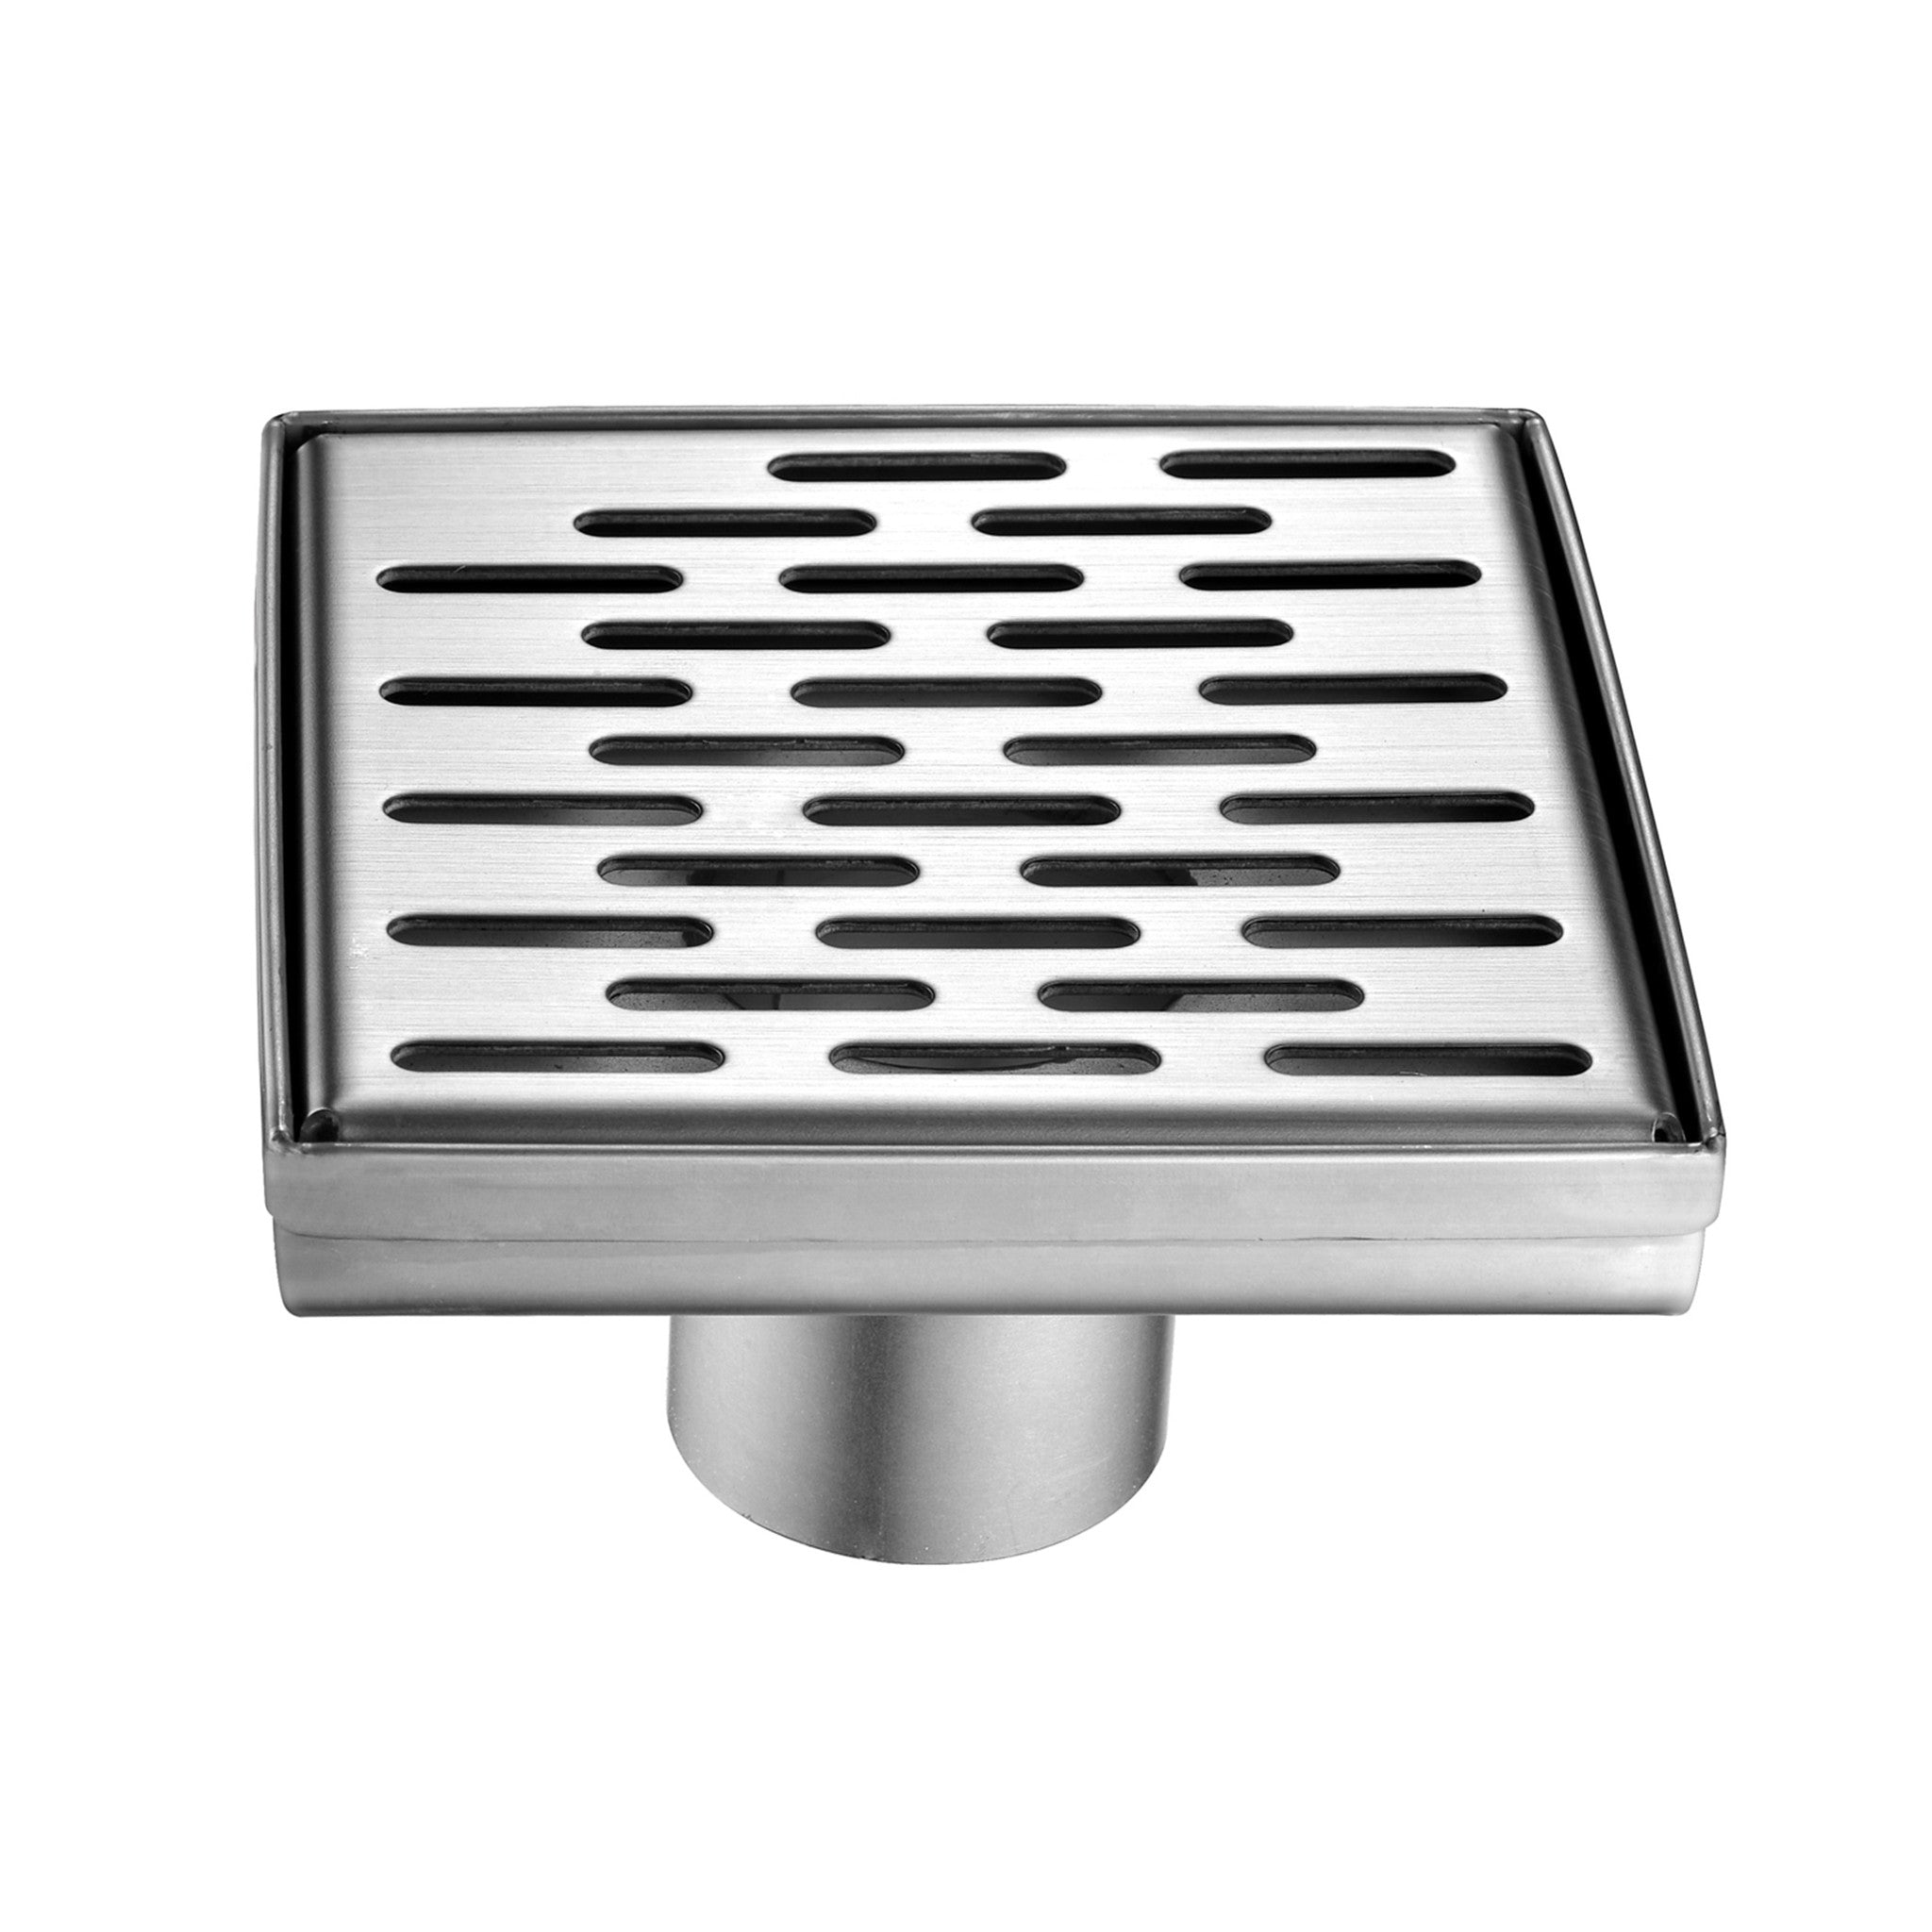 BAI 0586 Cast Stainless Steel 5-inch Square Shower Drain